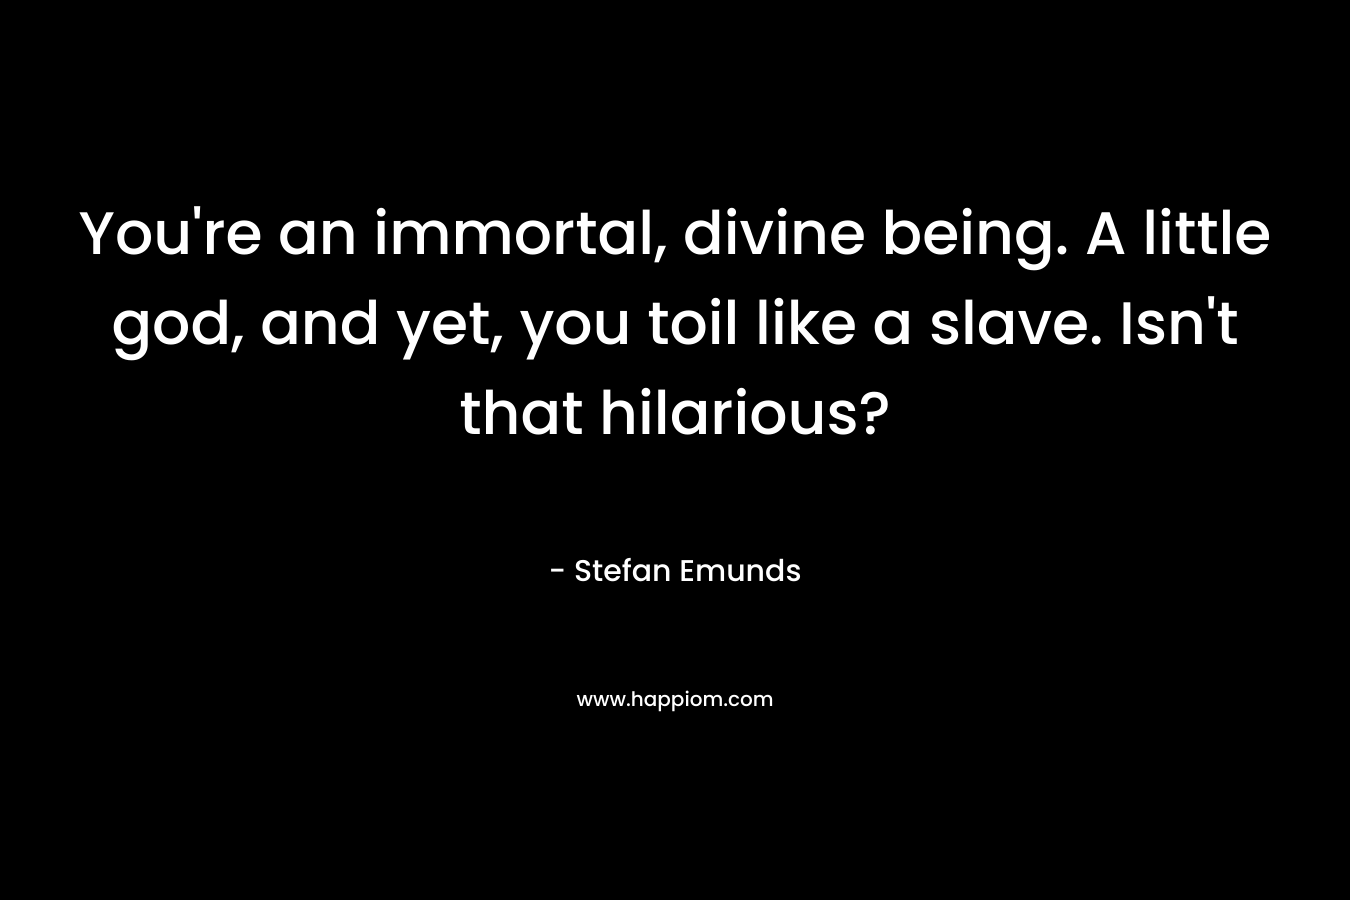 You're an immortal, divine being. A little god, and yet, you toil like a slave. Isn't that hilarious?